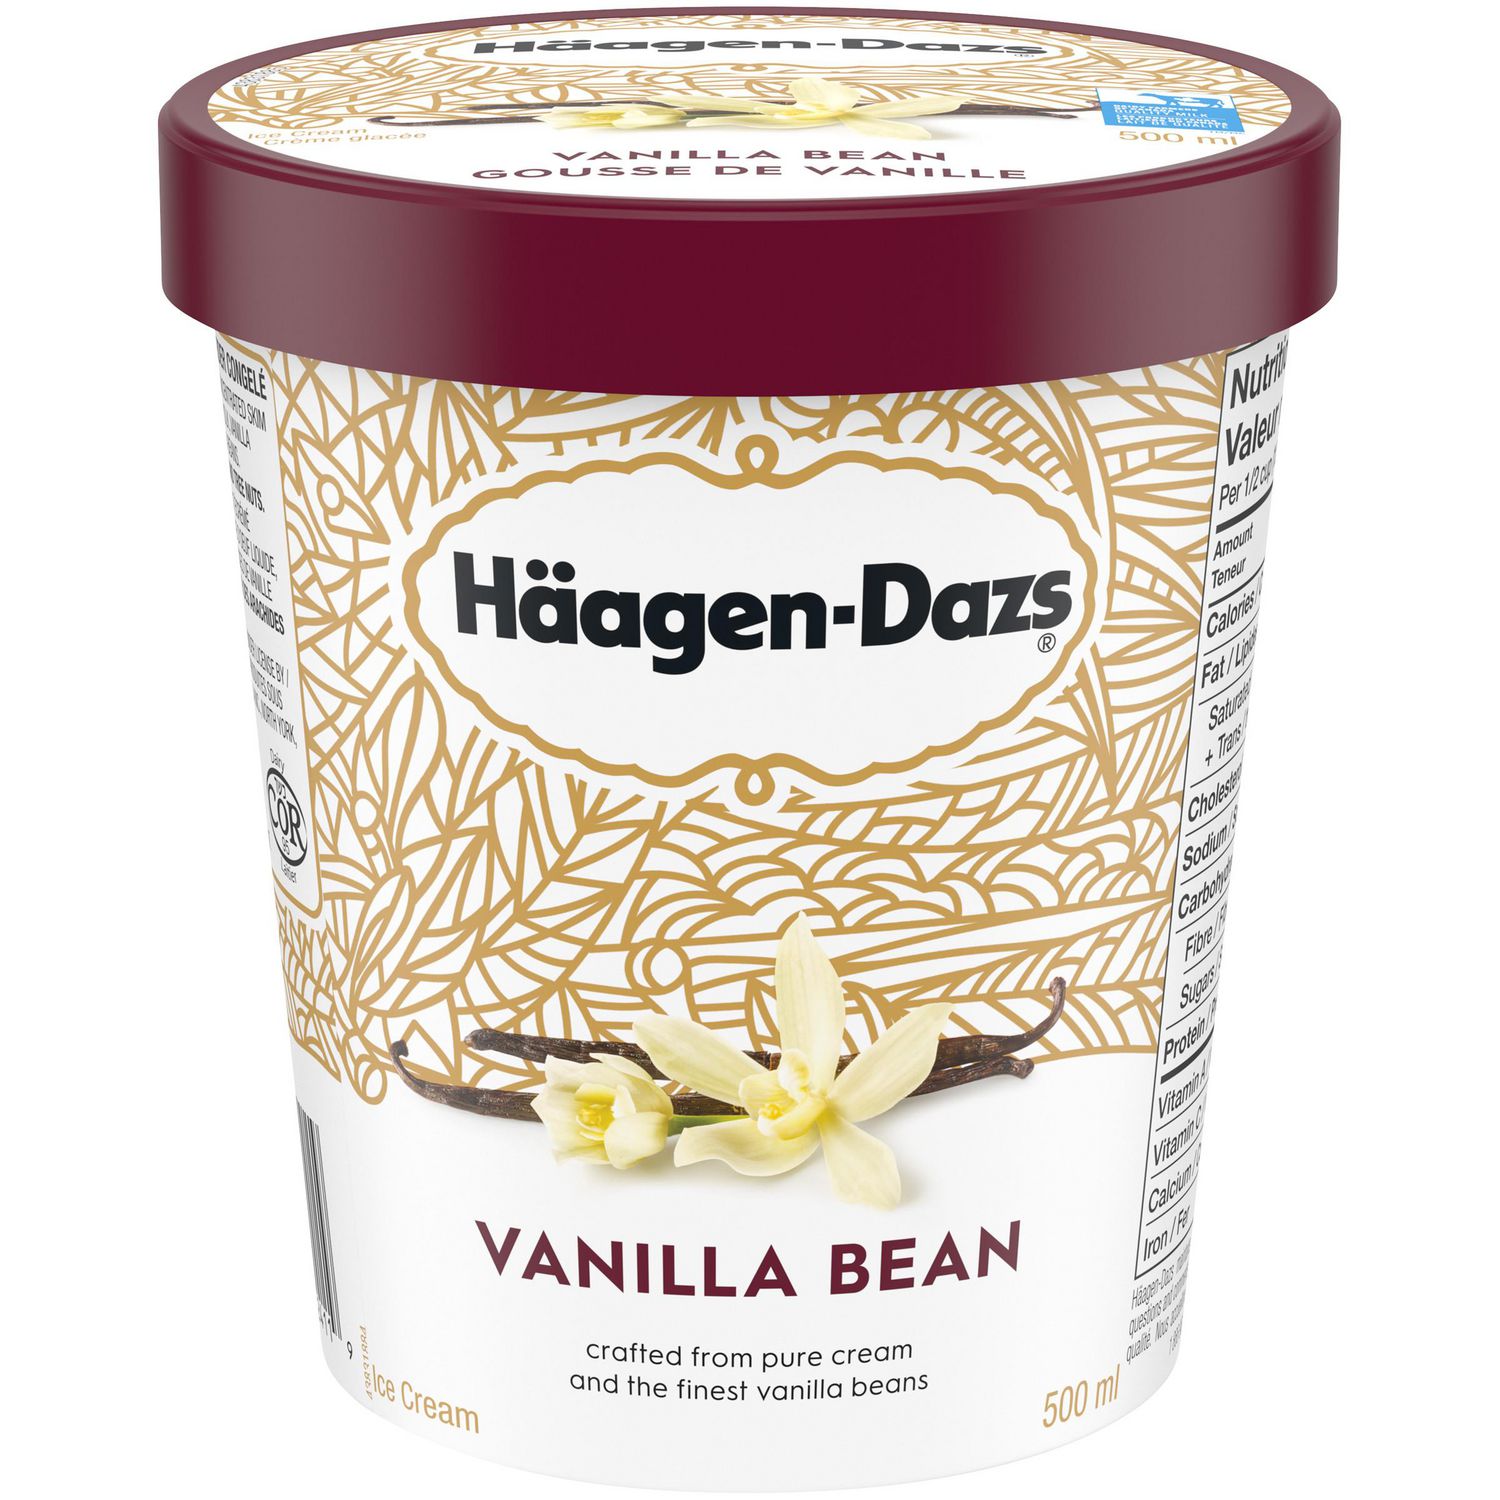 Albums 90+ Images the haagen dazs brand of ice cream originated in which country? Completed